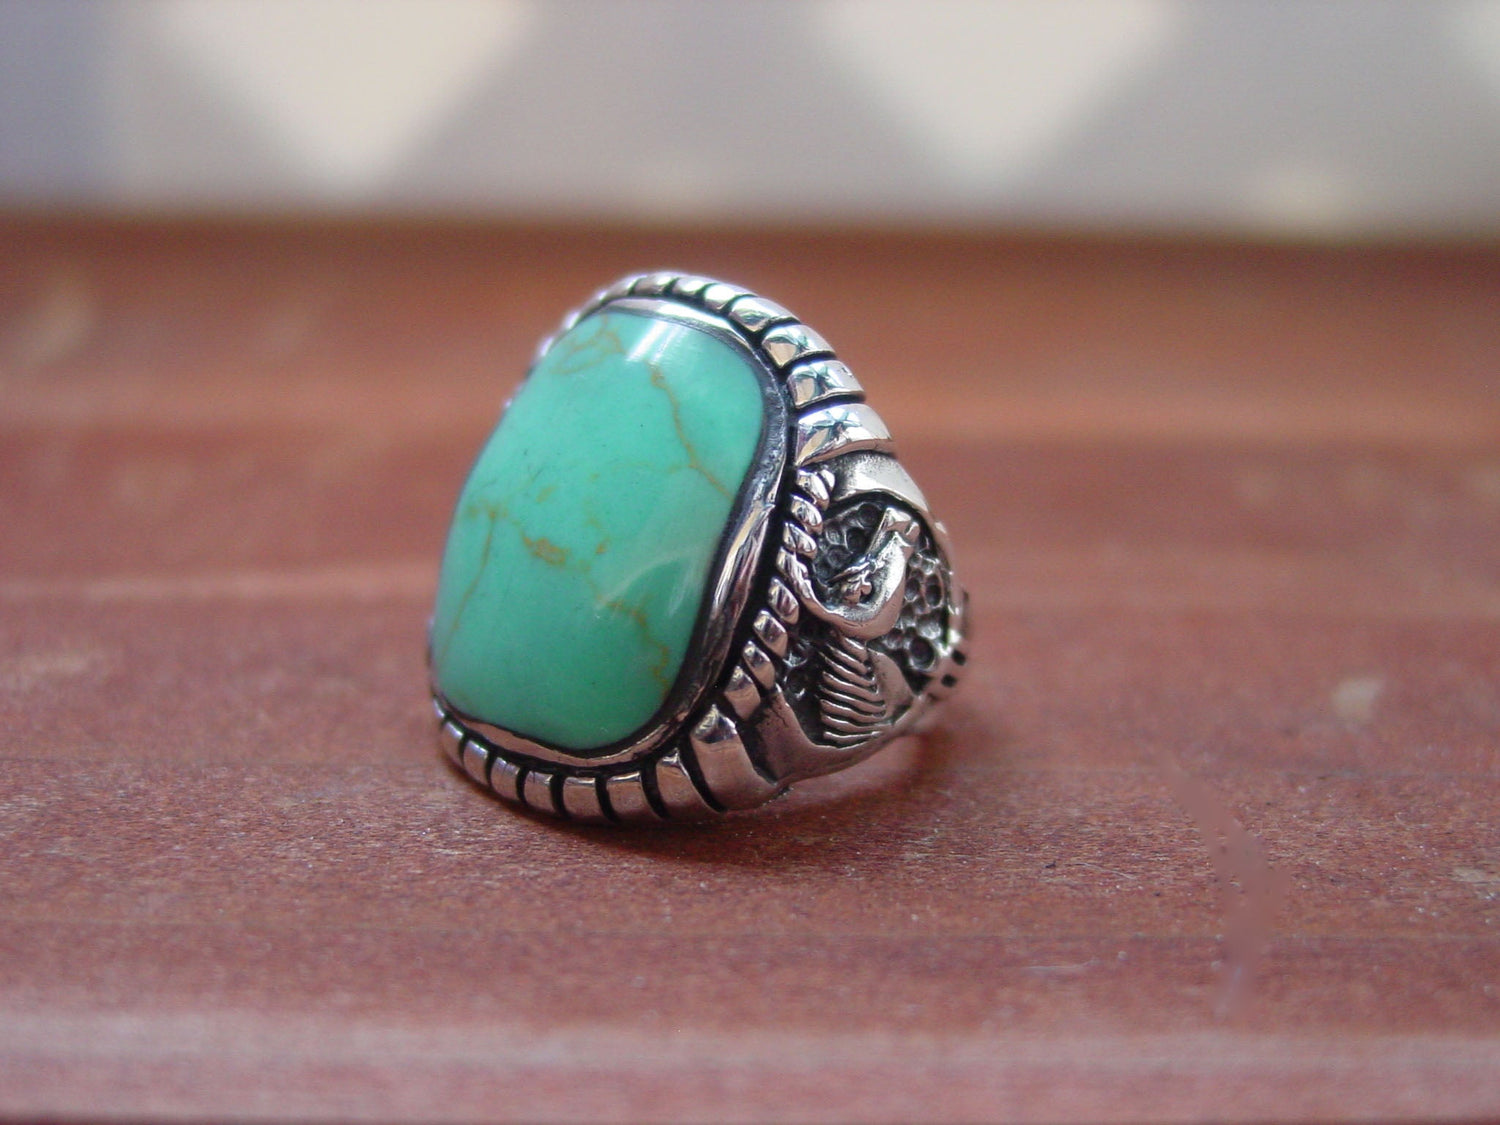 Sterling Adjustable Wrap Ring with Turquoise - 6153 - Southwest Indian  Foundation